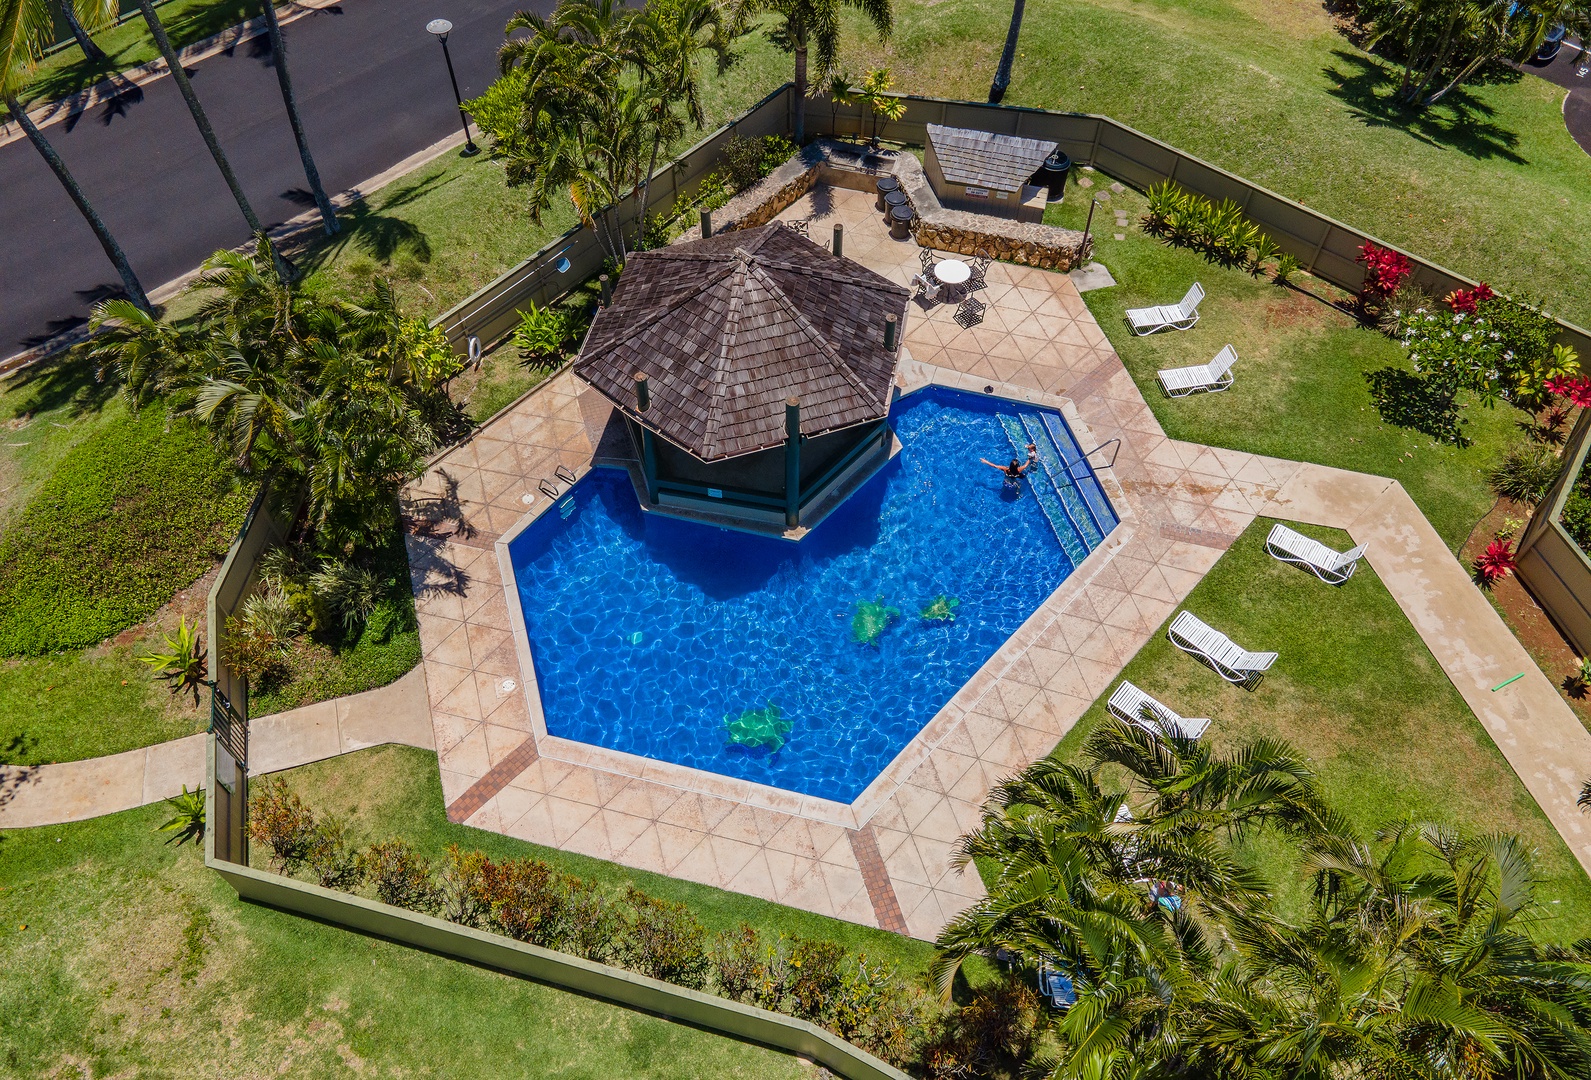 Kahuku Vacation Rentals, Kuilima Estates West #85 - Take a plunge in the pool!